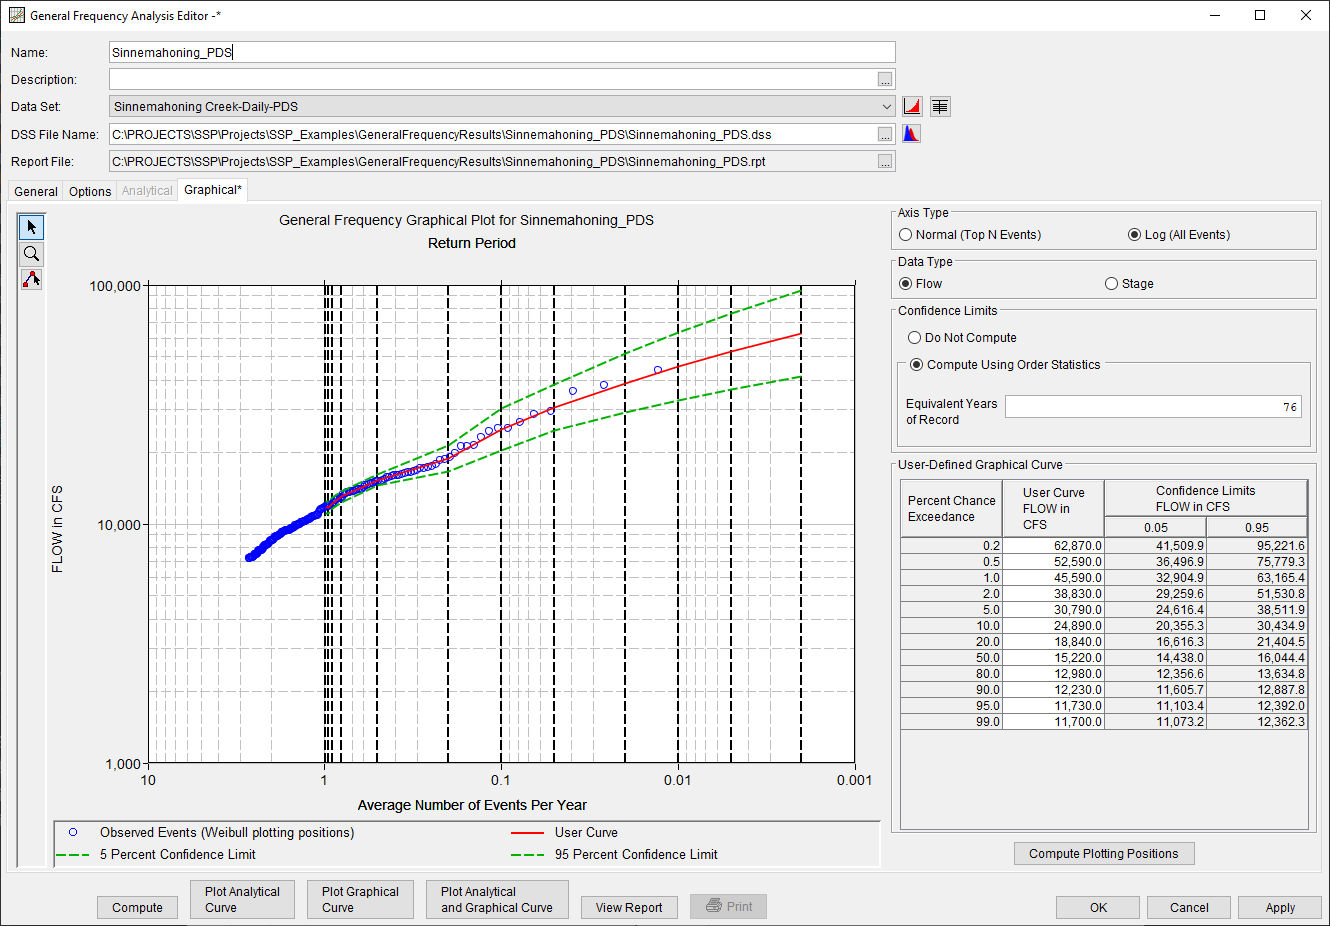 Figure 2b. Log Axis Type Options Selected on the Graphical Tab.